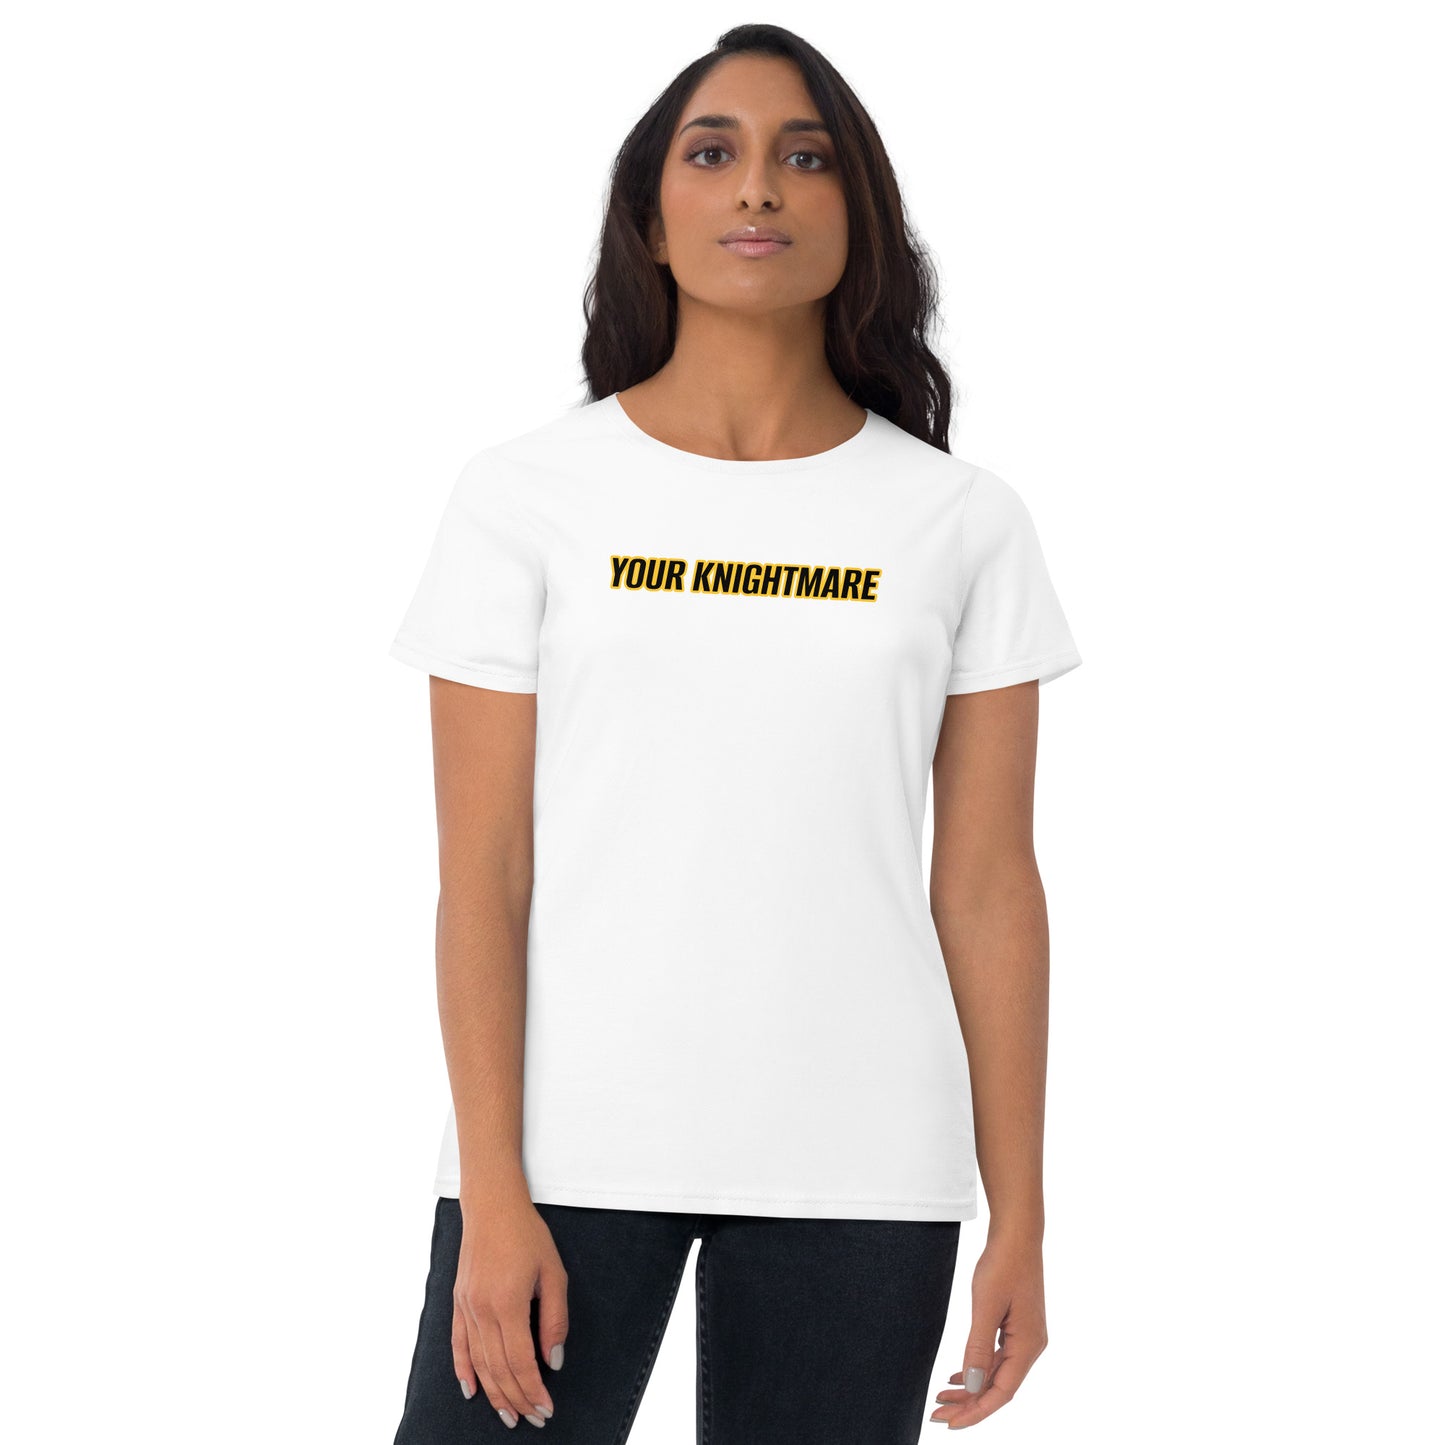 YOUR KNIGHTMARE | short sleeve t-shirt